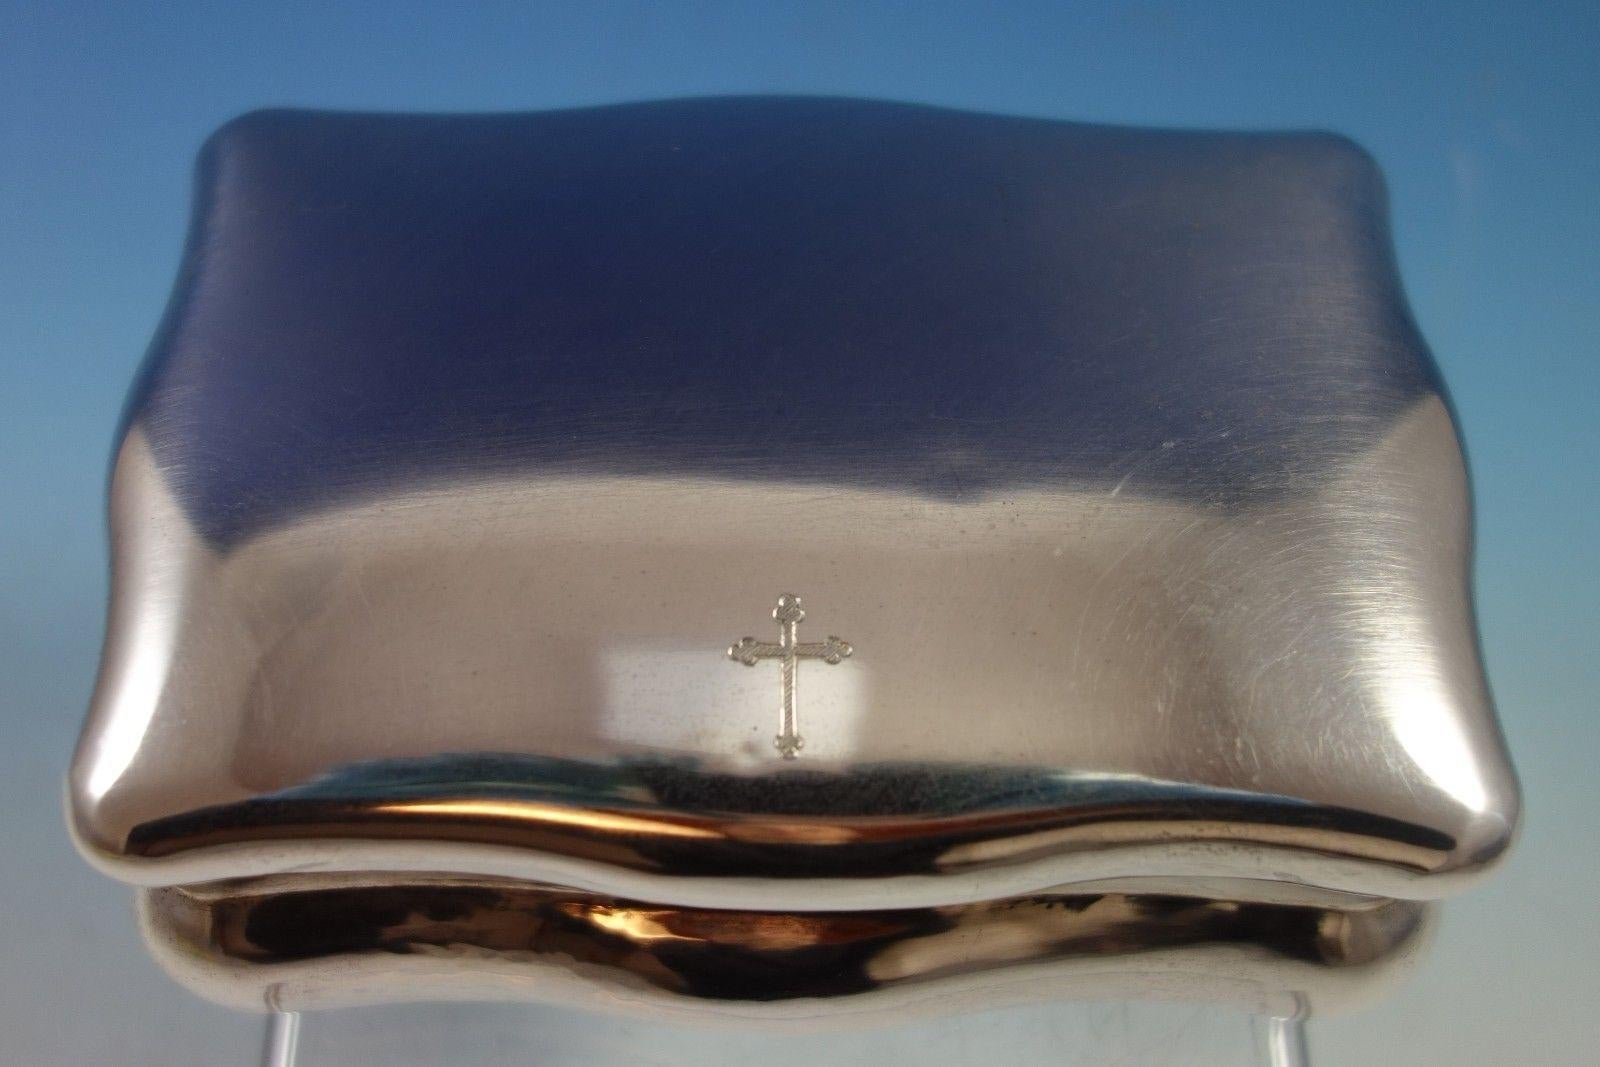 Buccellati fine Buccellati sterling silver jewelry box. The box has an etched cross on the top. It also has an inscription carved on the lip, inside edge of the cover that says, Christine Grace Marie June 19, 1990. The box measures 2 5/8 x 4 1/4 x